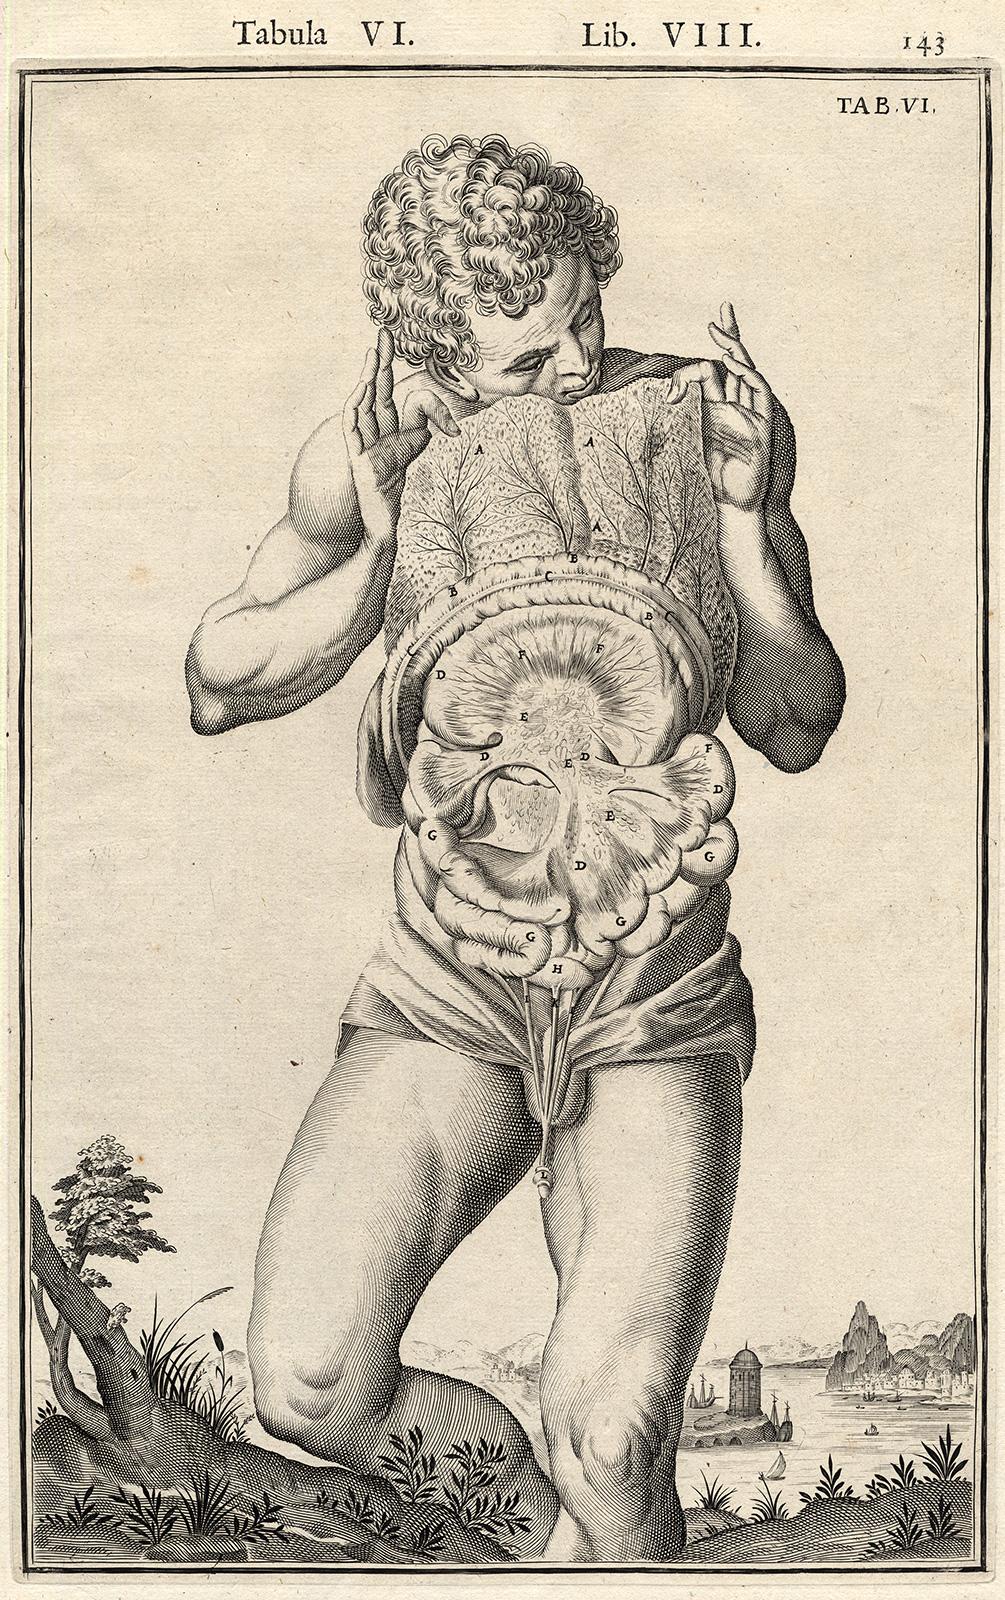 2 anatomical prints - Male abdominal cavity by Spigelius - Engraving - 17th c. - Print by Adrianus Spigelius